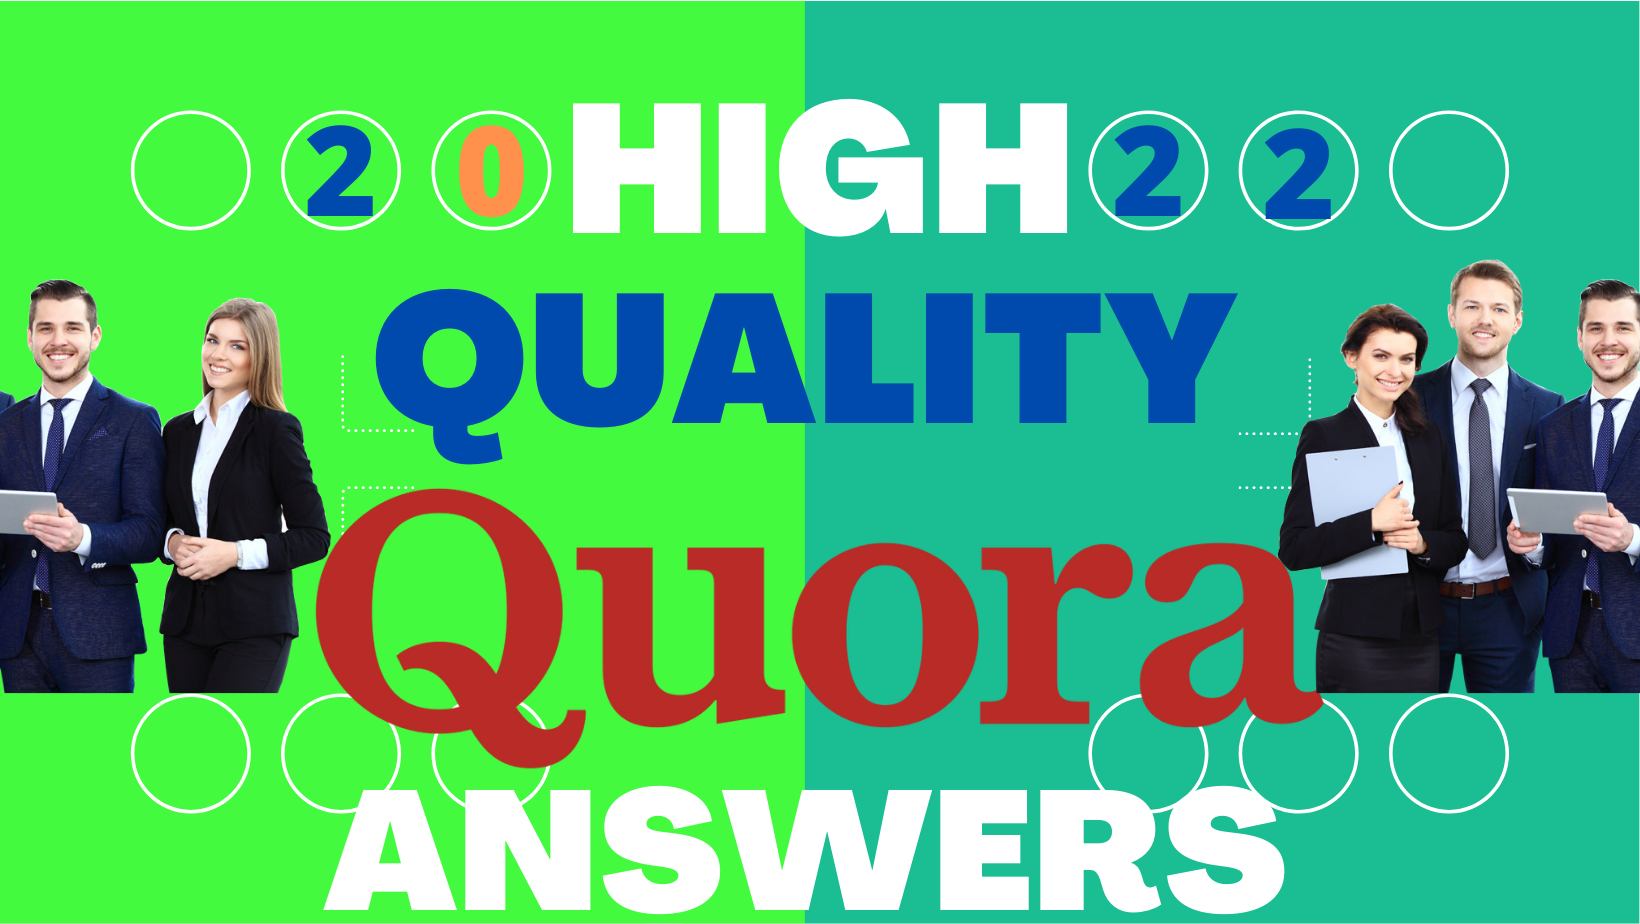 We will provide 30 HQ Quora Backlinks to get more traffic